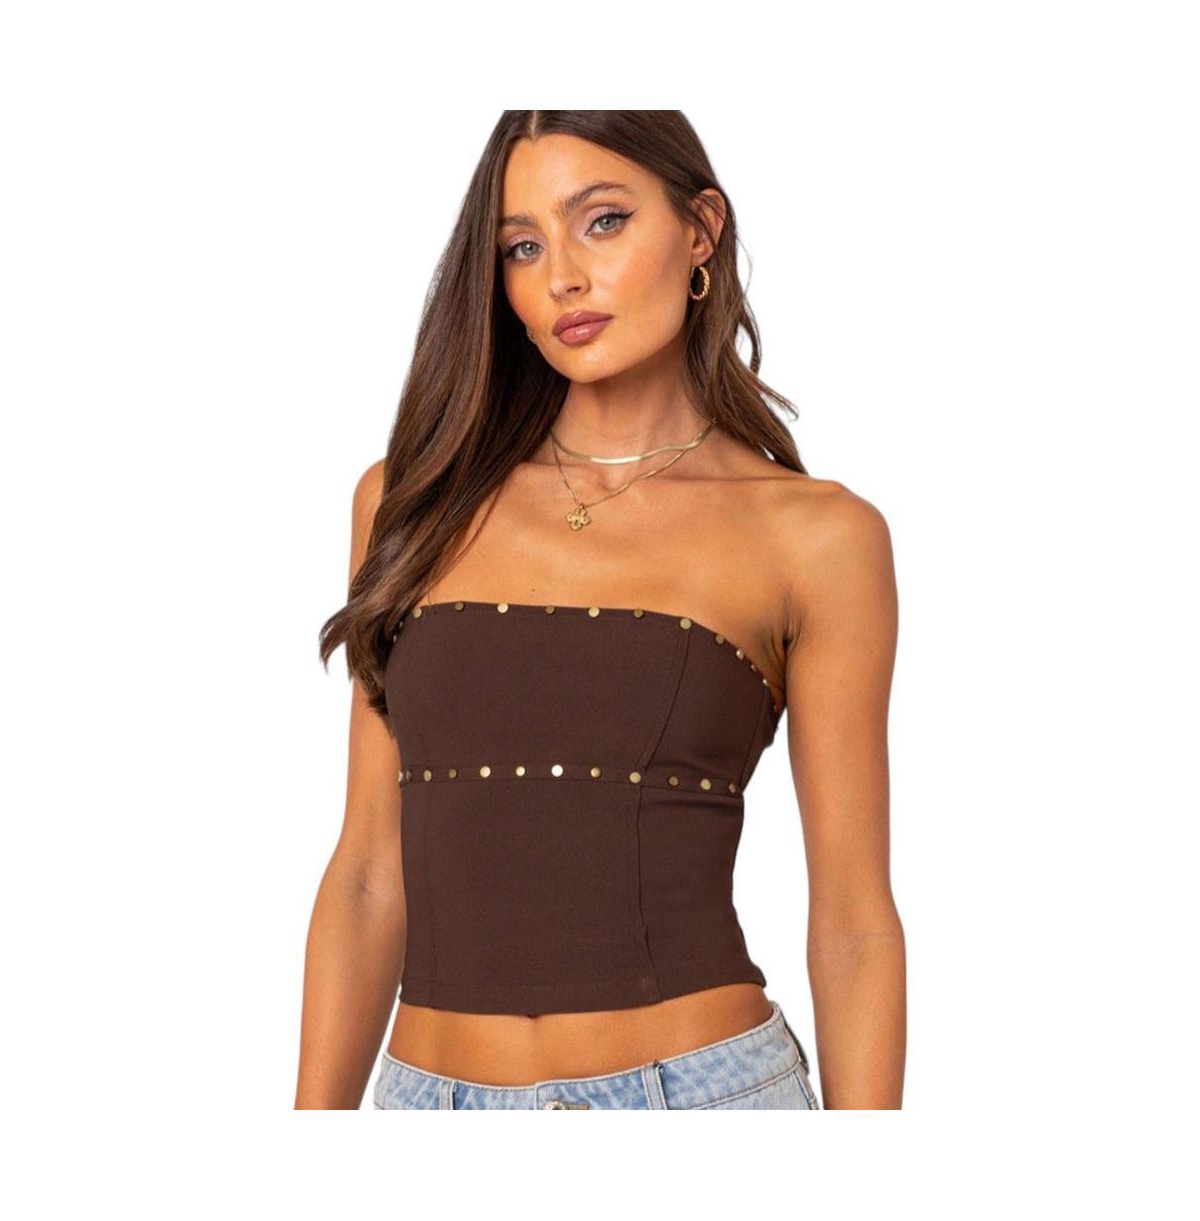 EDIKTED WOMEN'S DARCY STUDDED LACE UP CORSET TOP